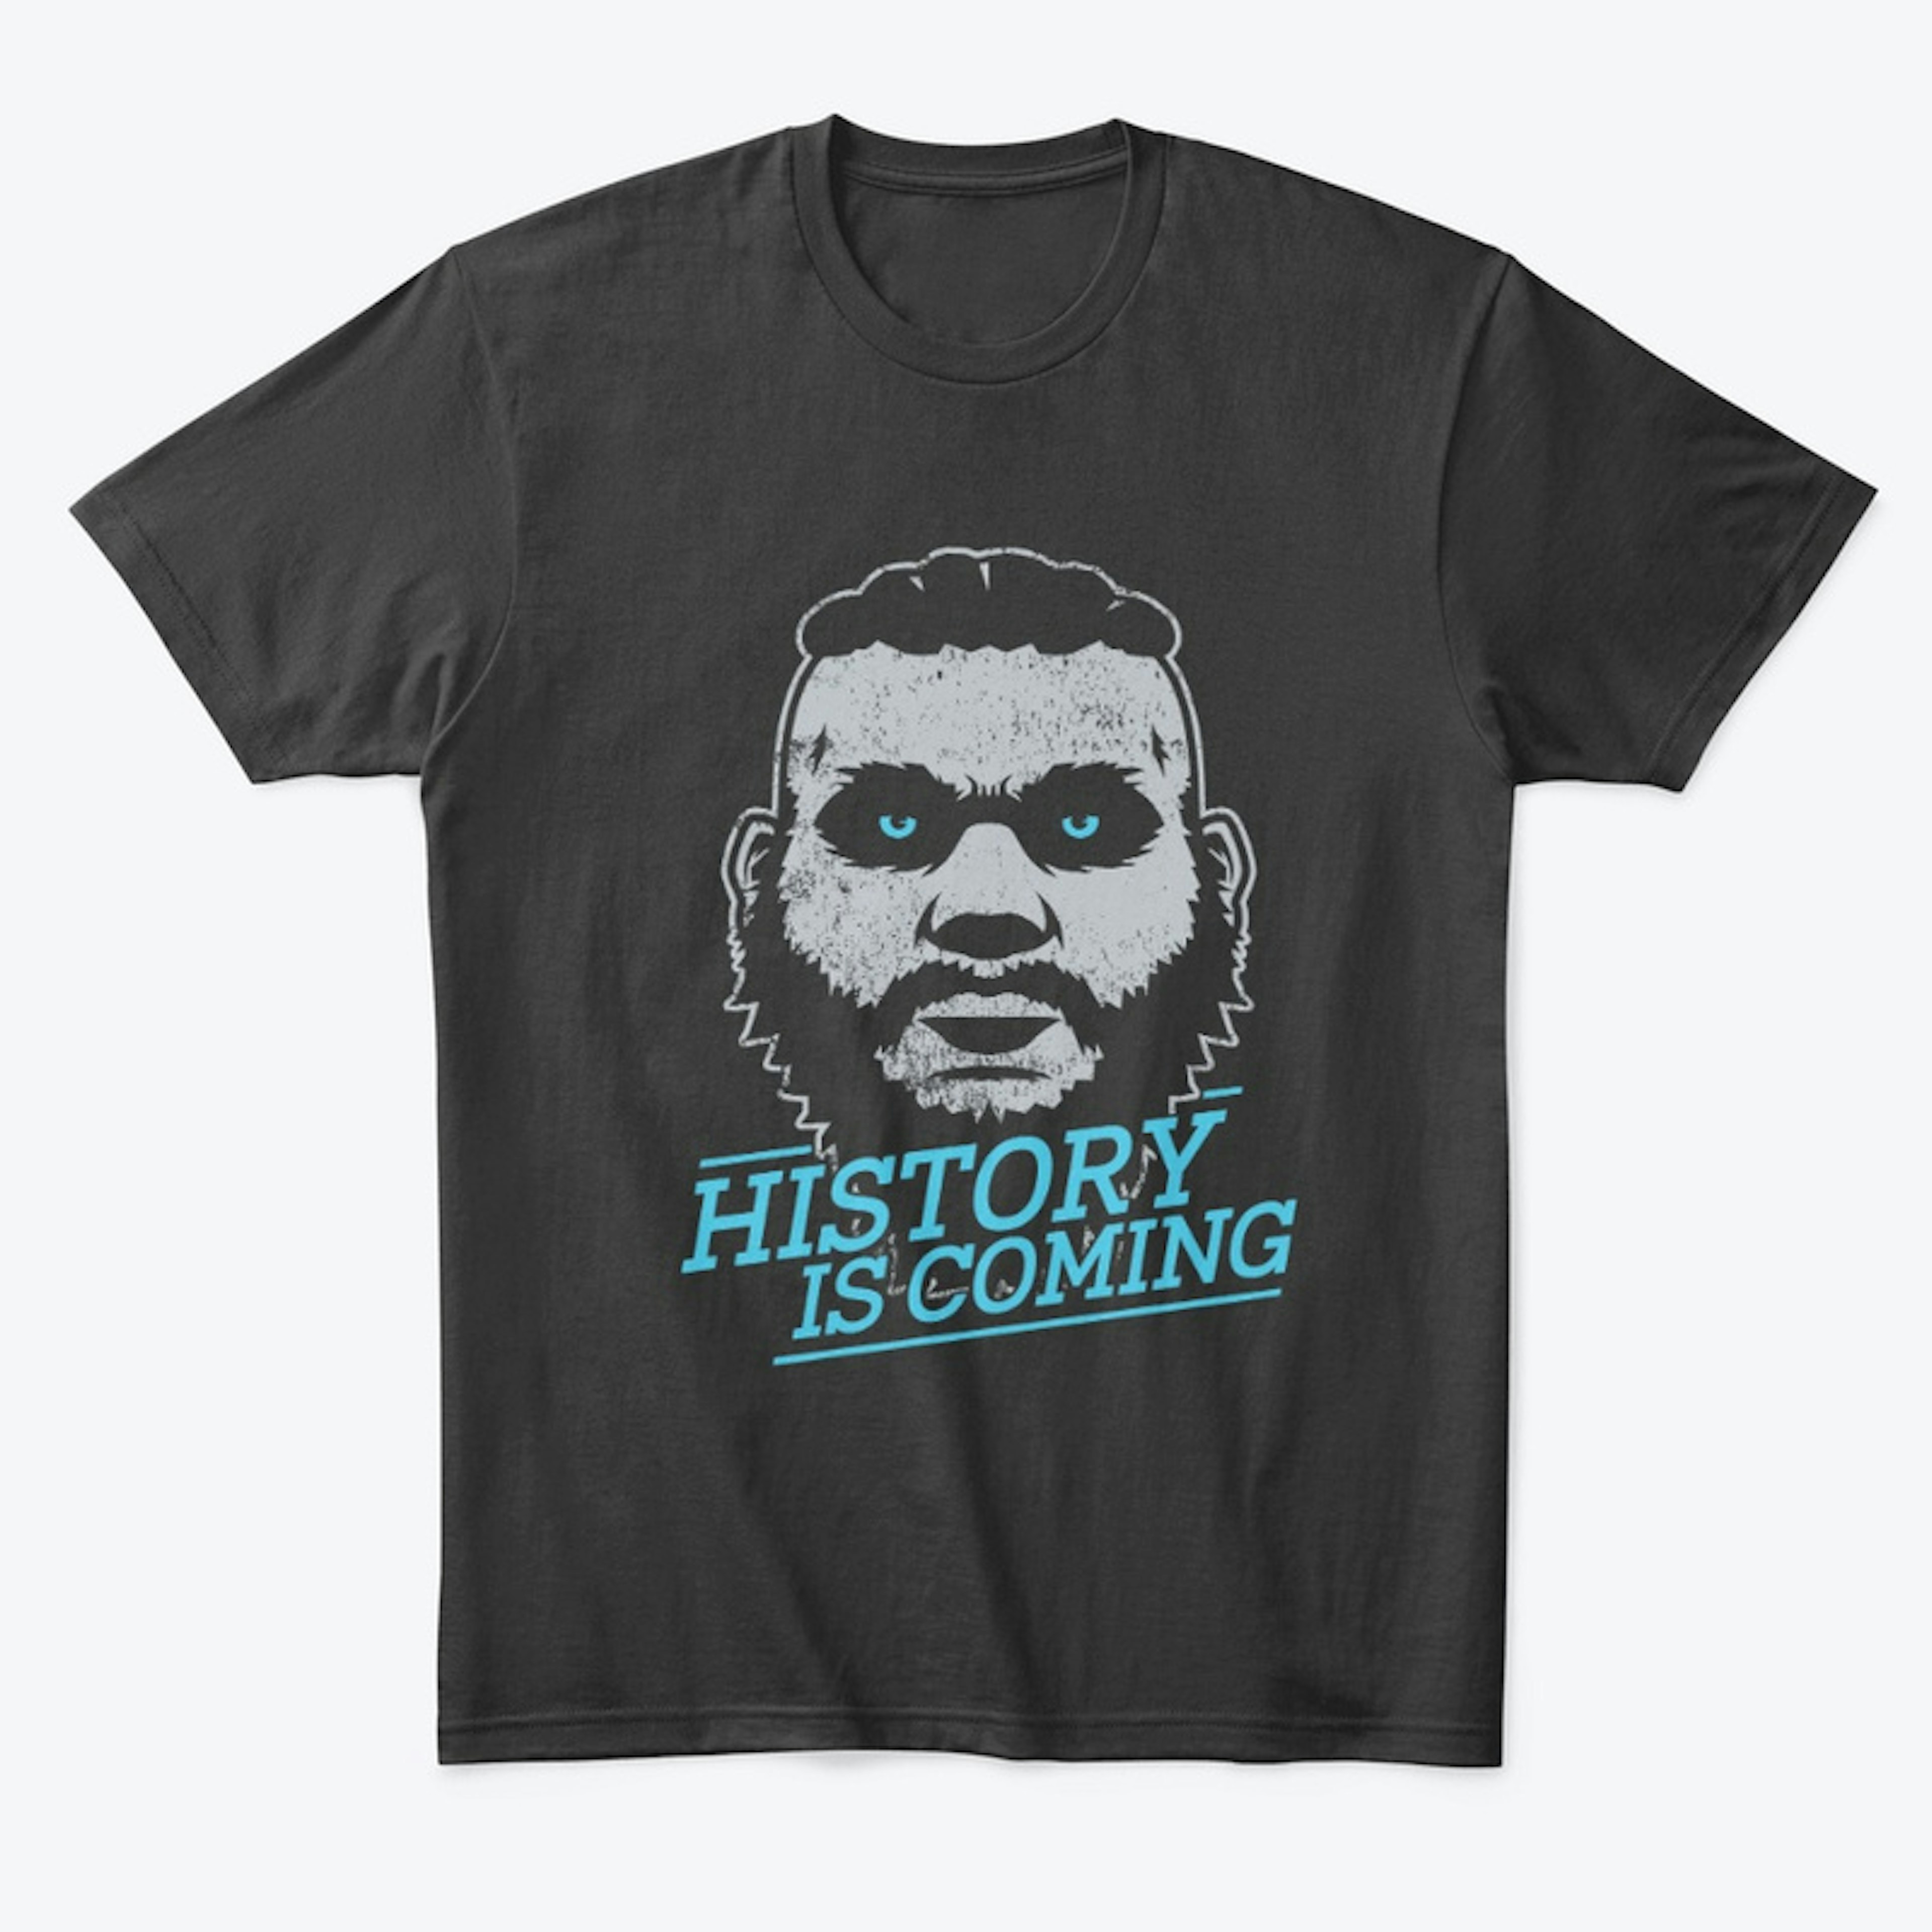 History is coming - Black